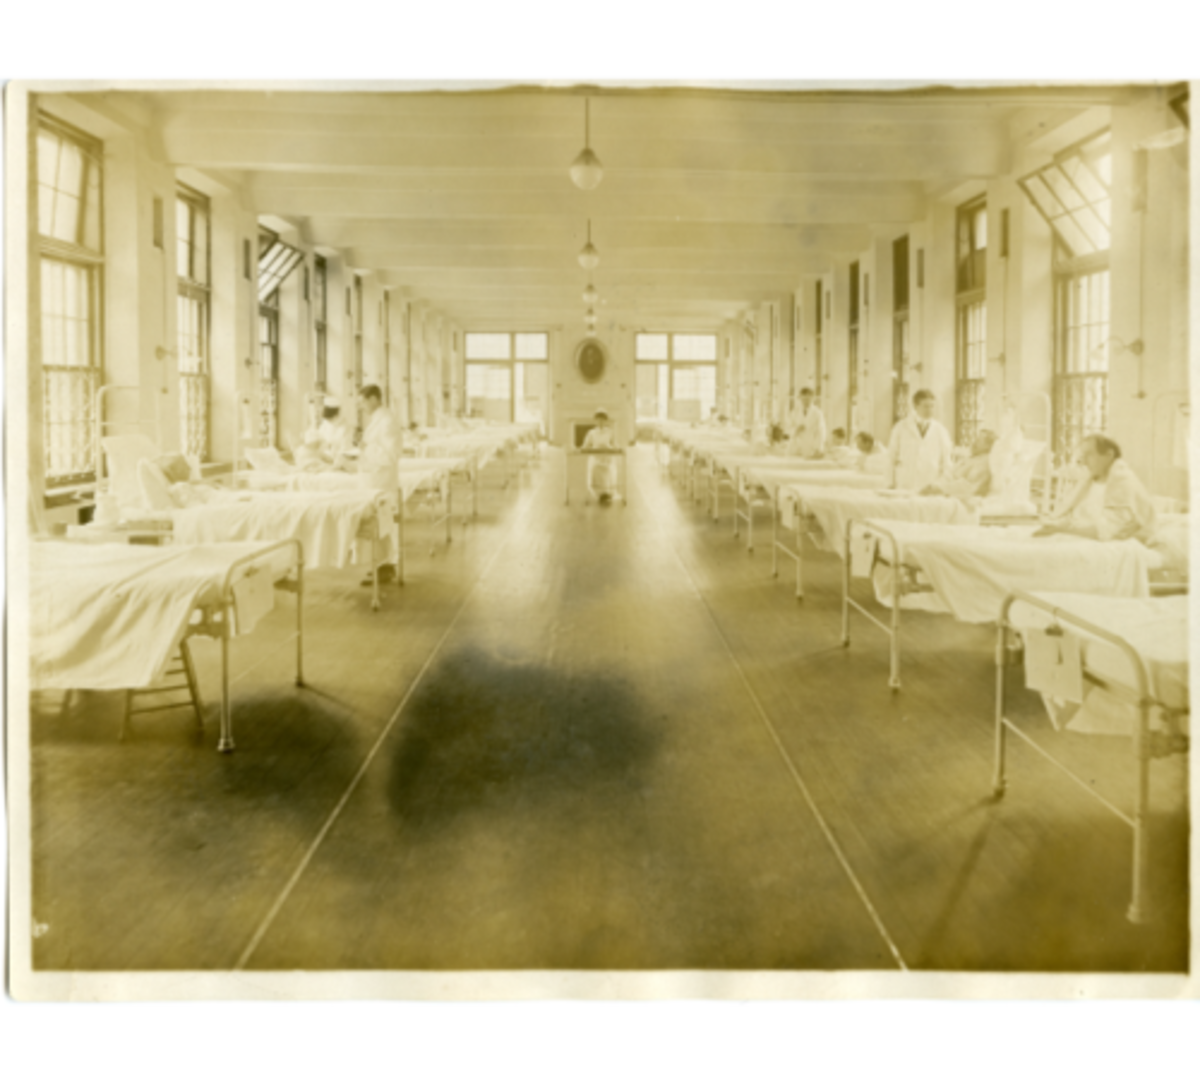 An image of a hospital during the Spanish flu in Boston